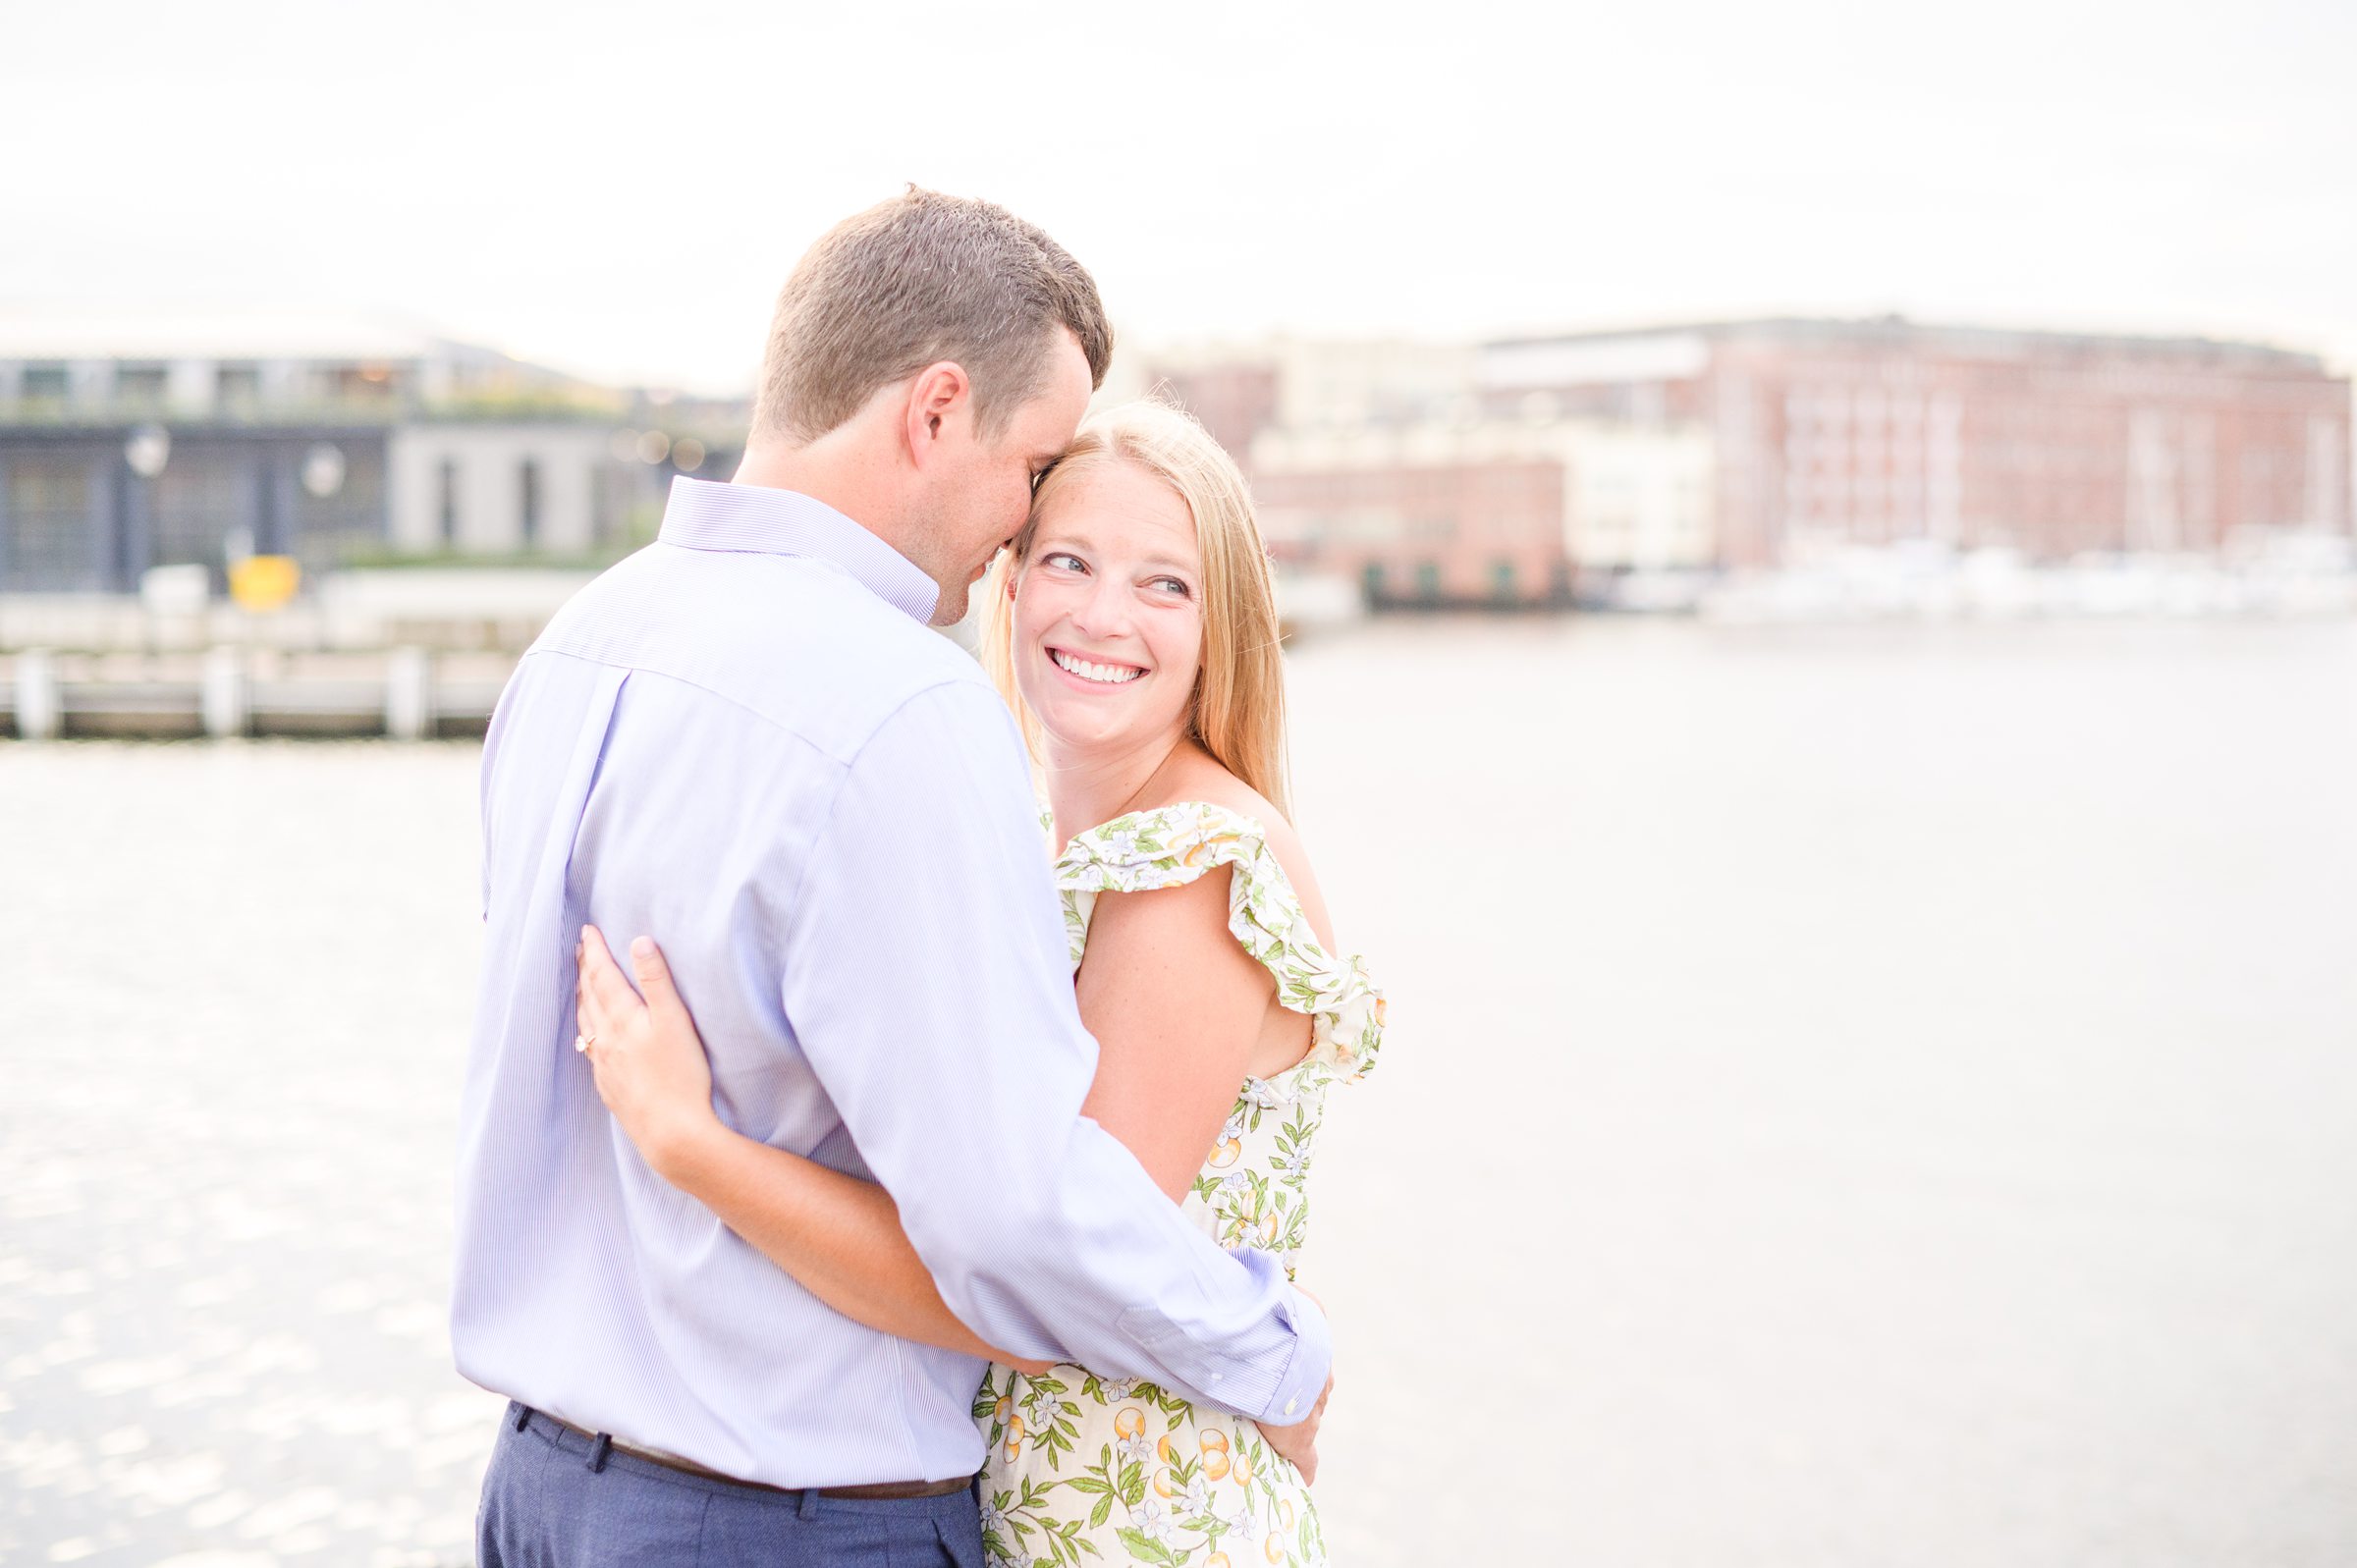 Couple poses near Henderson's Wharf during Fells Point engagement session photographed by Baltimore wedding photographer Cait Kramer